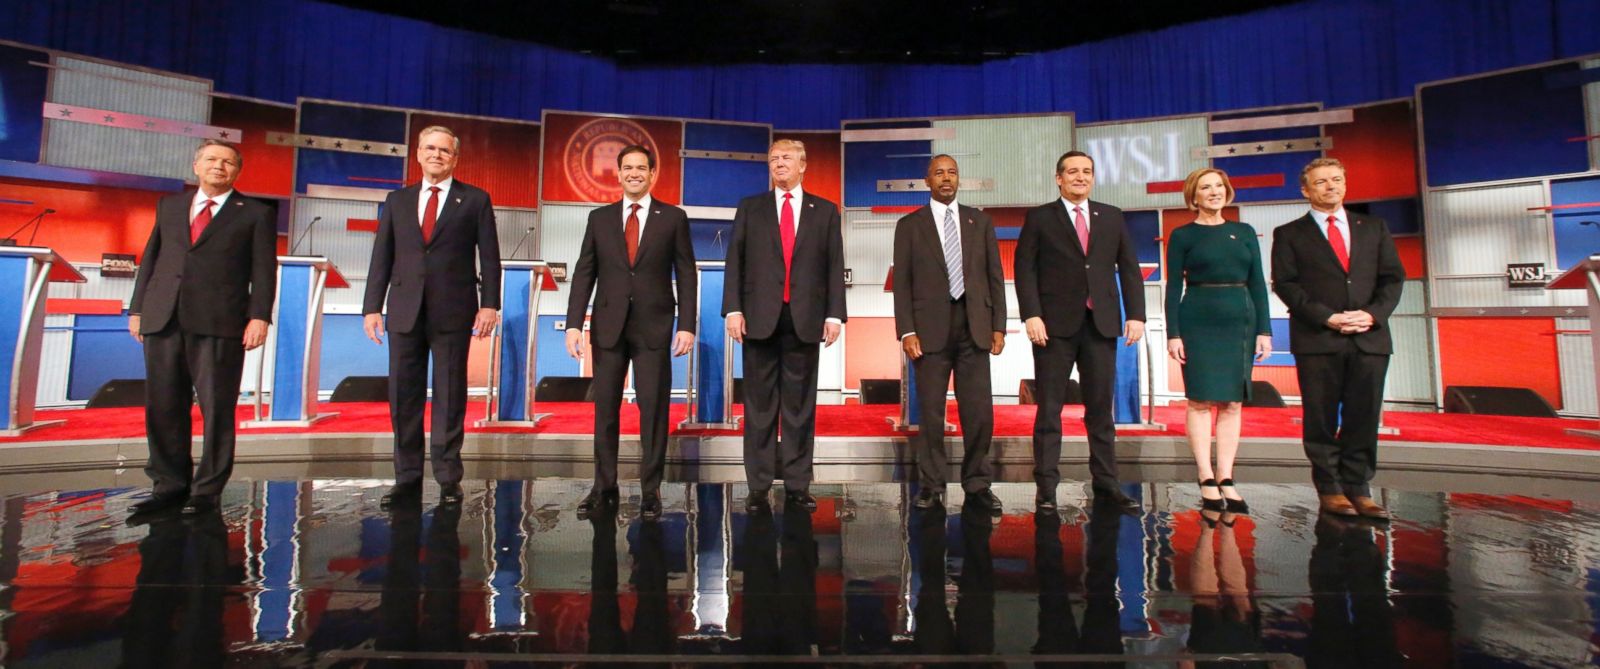 5 Ways The Fourth Republican Debate Changed The Presidential Race